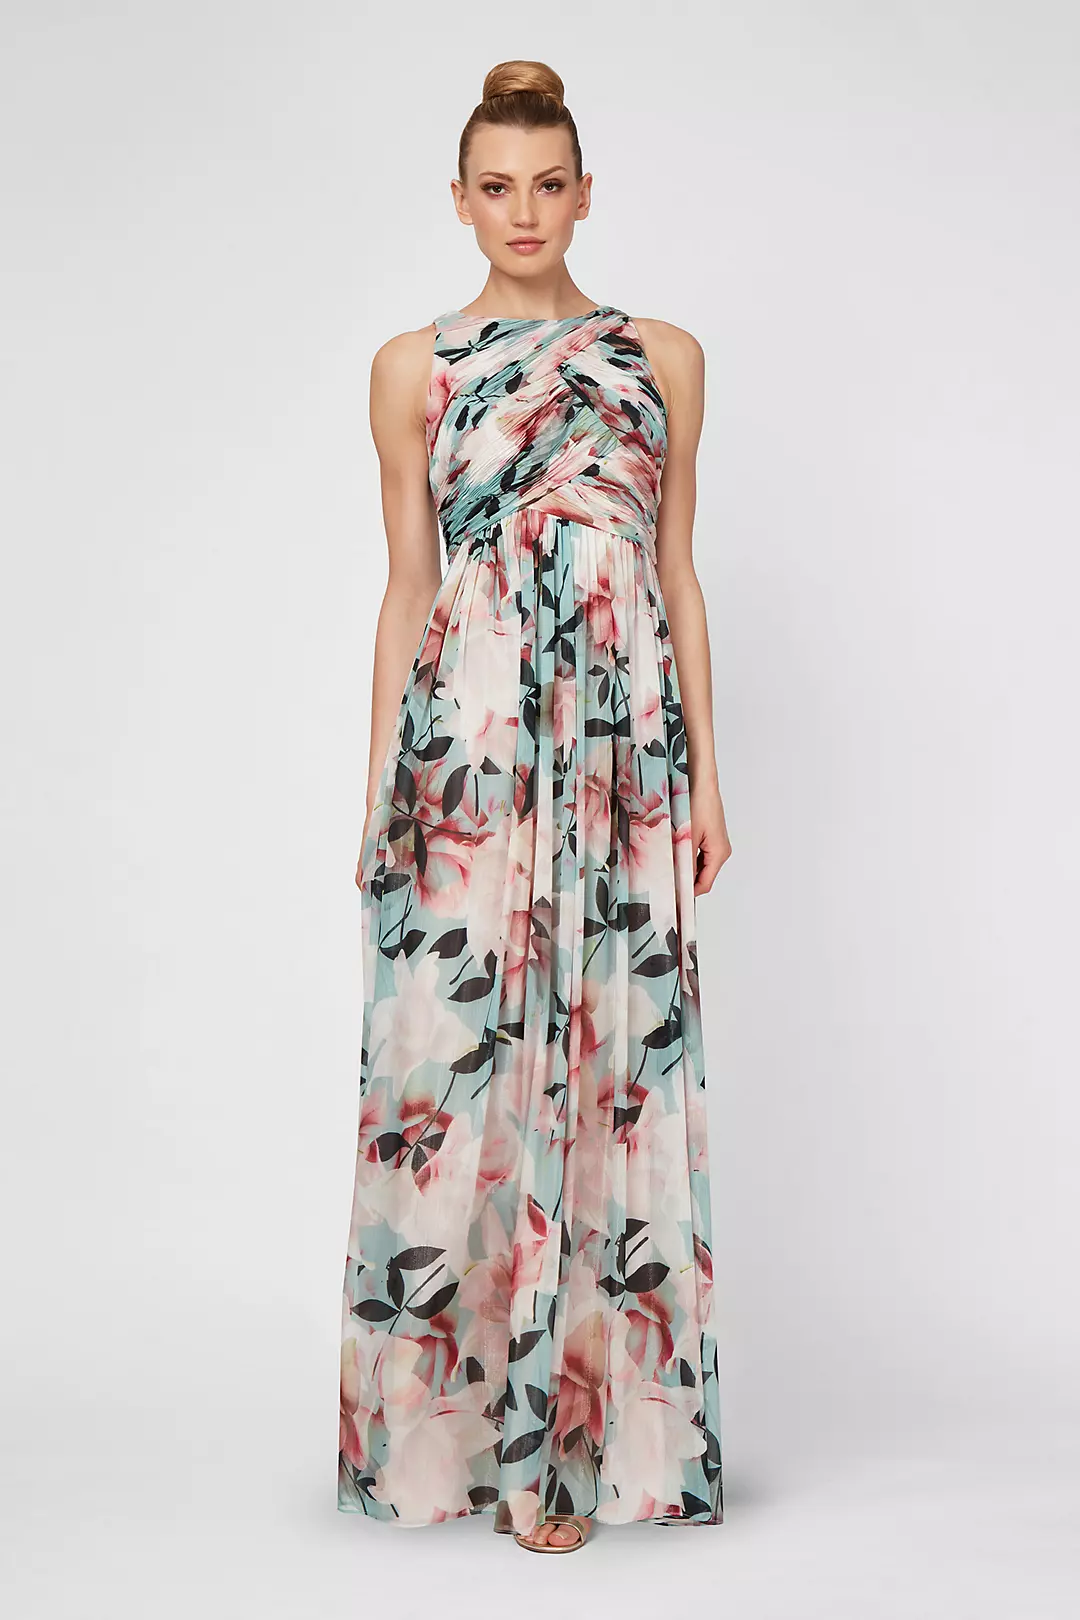 Printed Chiffon High-Neck A-line Ruched Dress Image